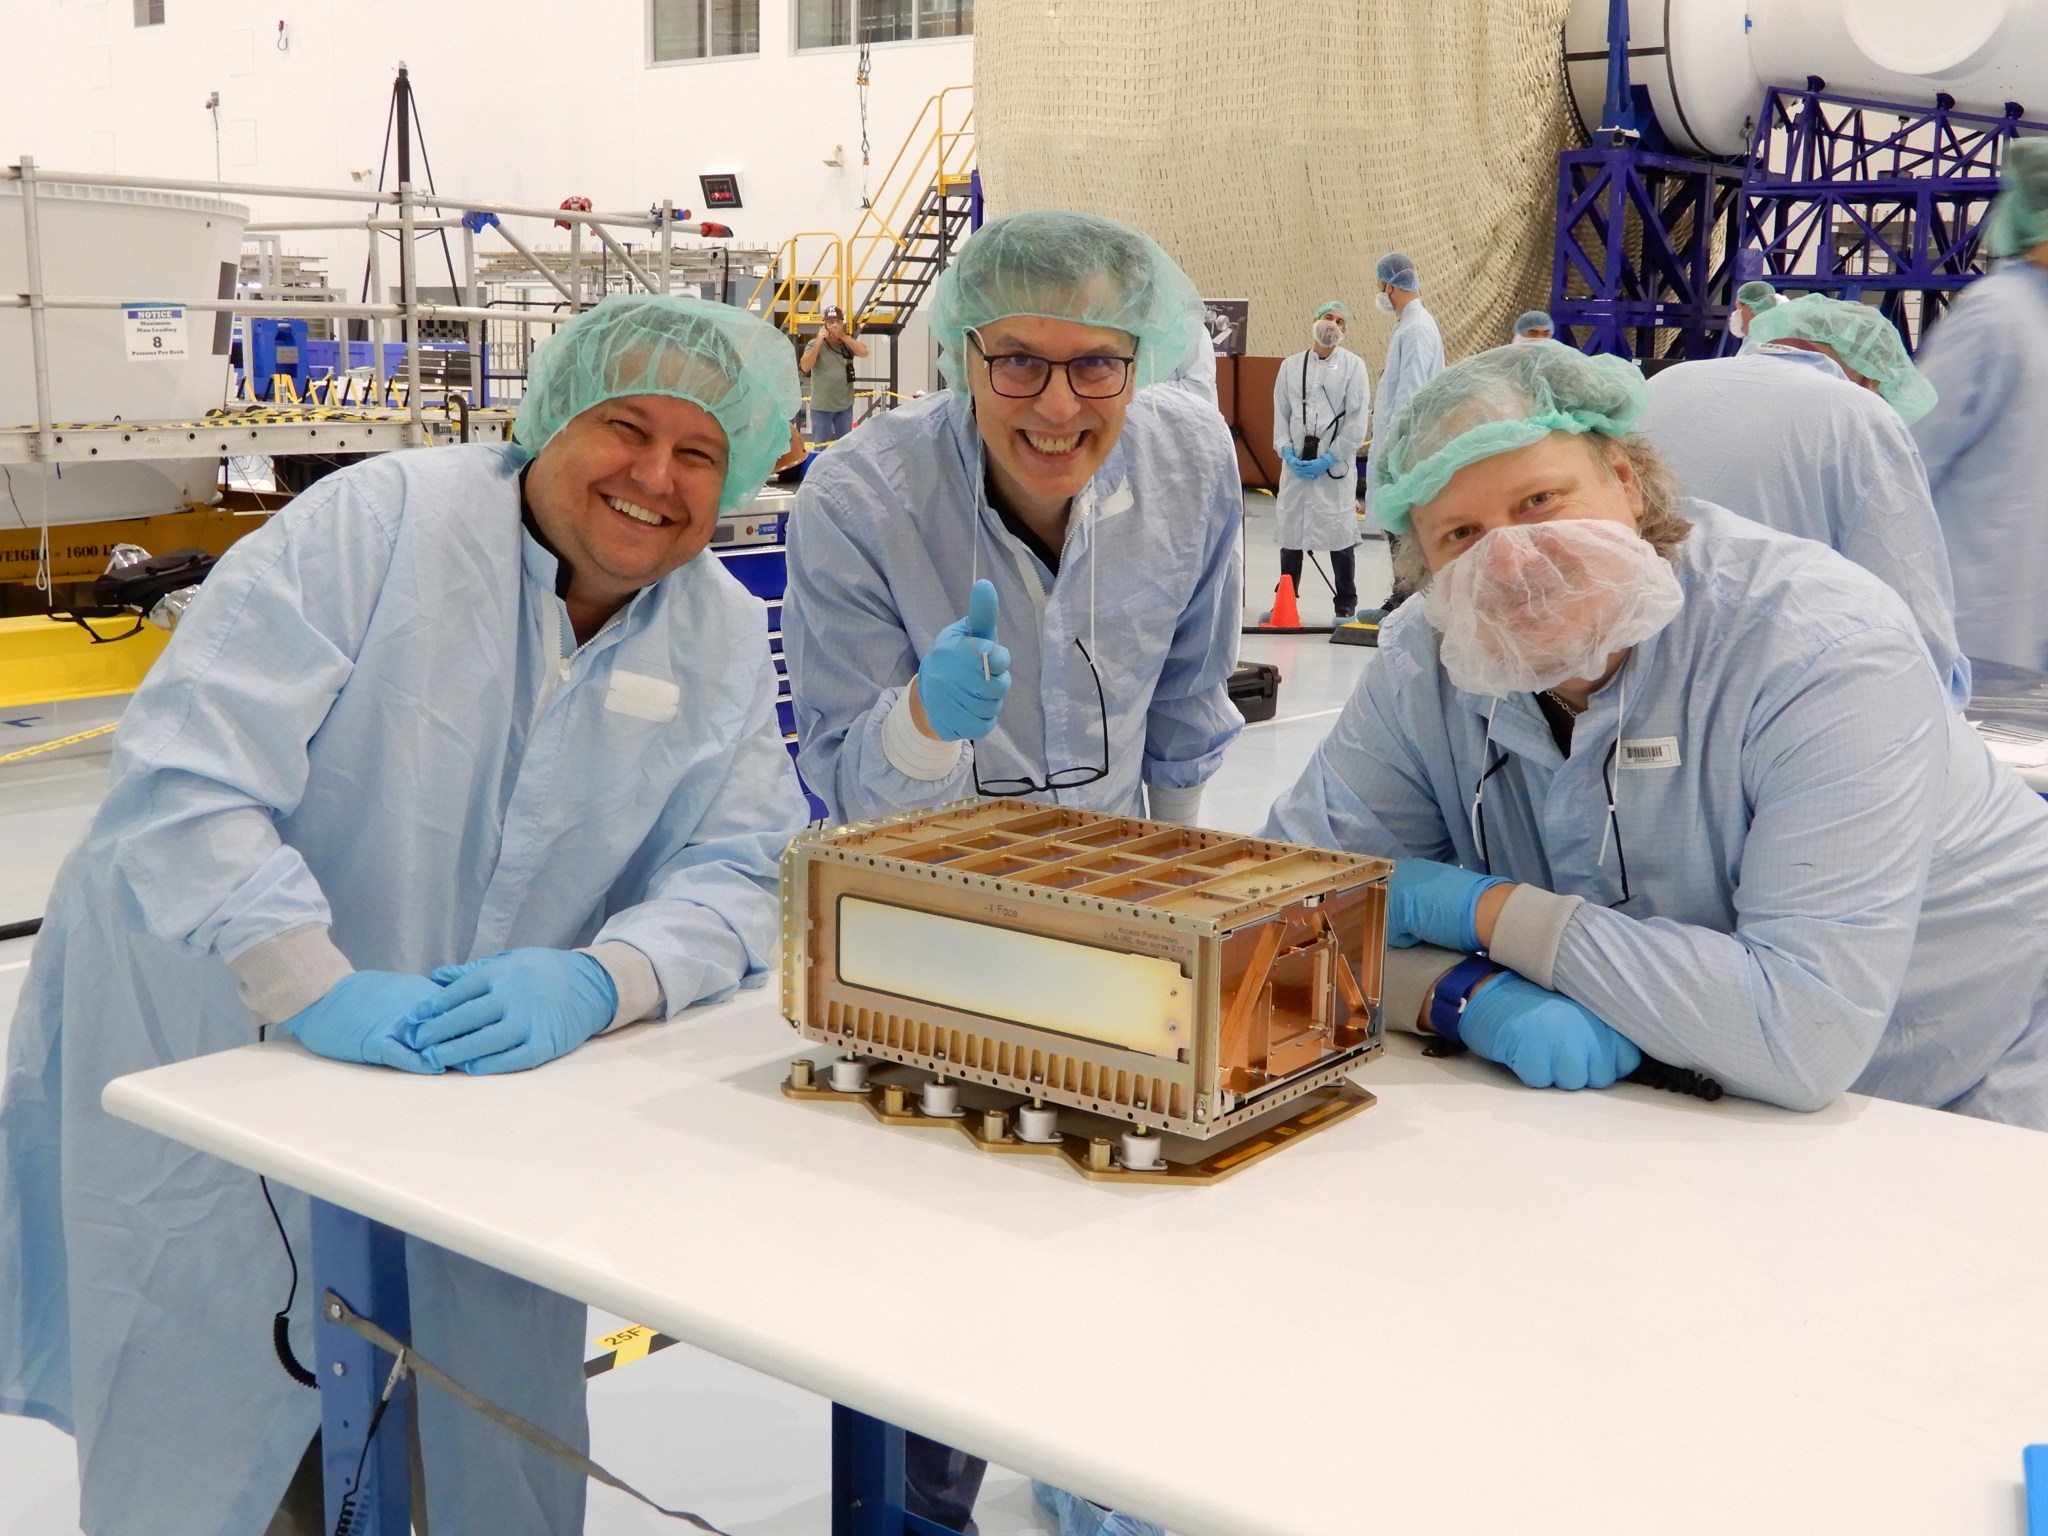 Members of Team Miles with the CubeSat developed during the NASA Cube Quest Challenge. From left to right: Alex Wingeier, Don Smith, Wes Faler. Image Credit: Team Miles